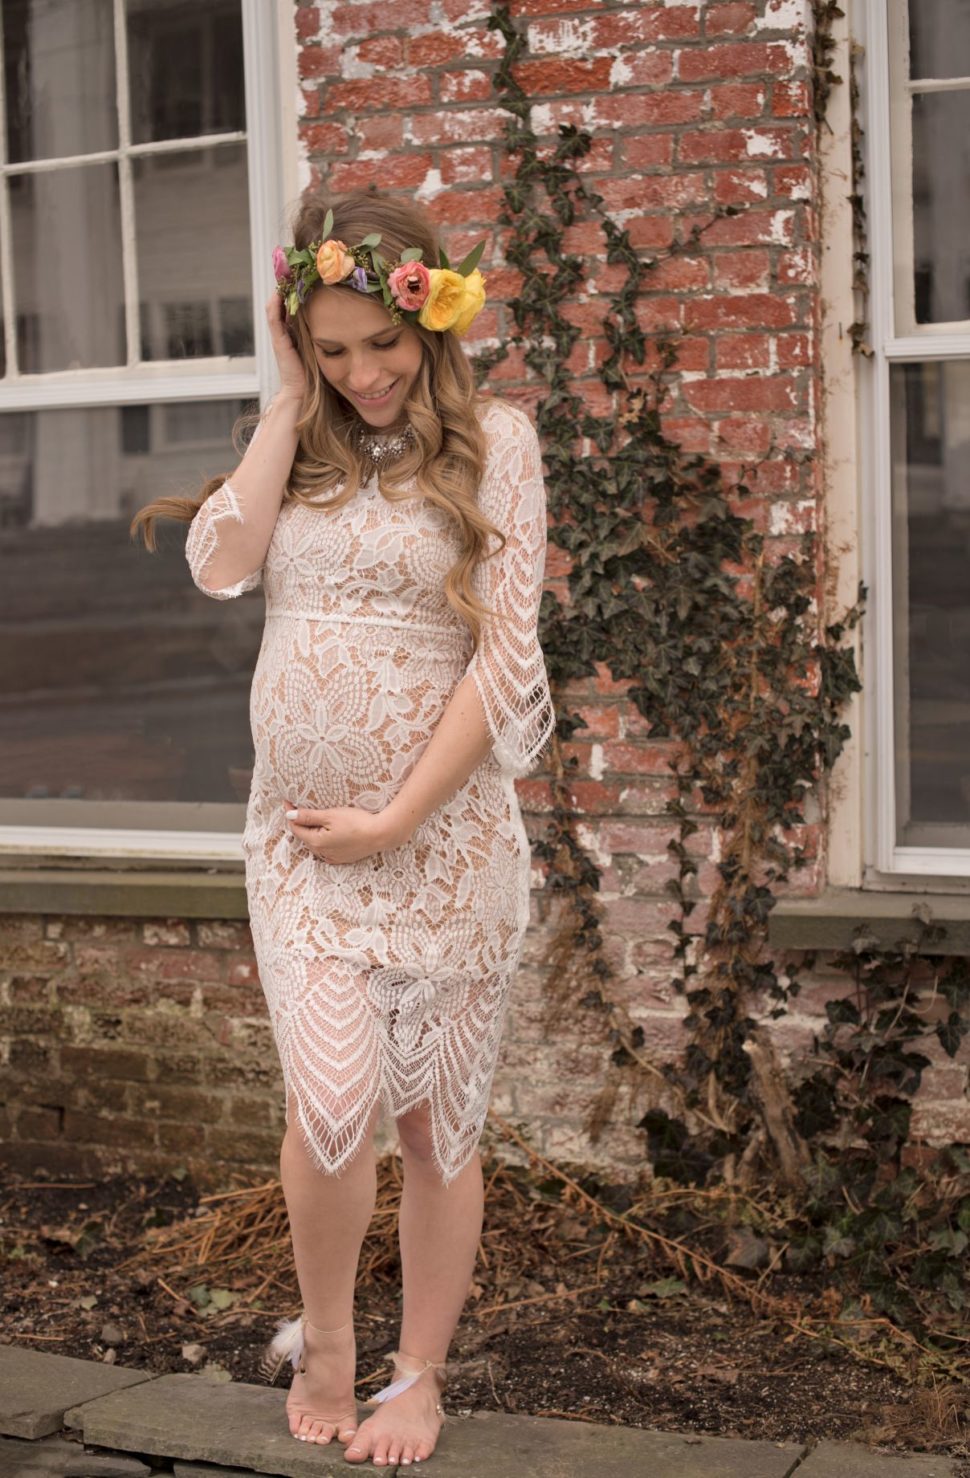 Medium Size of Baby Shower:pink Maternity Dress Maternity Gowns For Photography Maternity Dresses For Baby Shower Mom And Dad Baby Shower Outfits Baby Shower Dresses Cute Inexpensive Maternity Clothes Maternity Evening Gowns Plus Size Maternity Dresses For Baby Shower